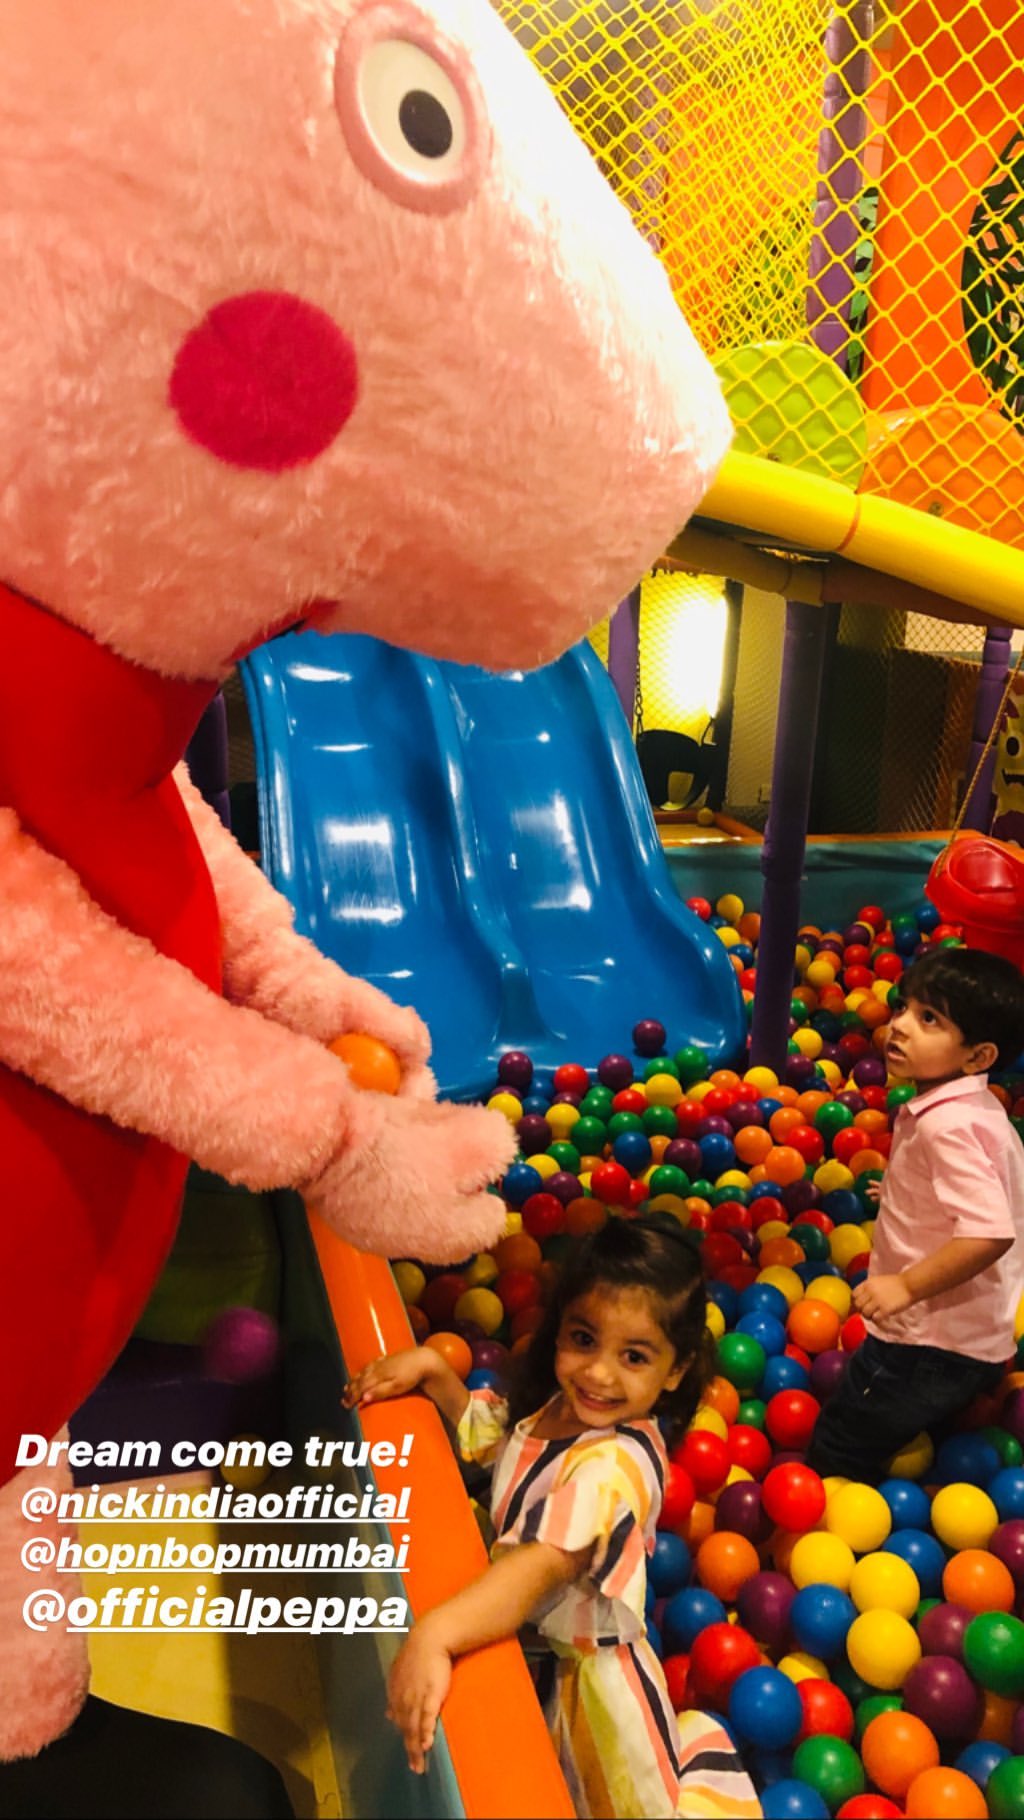 Shahid Kapoor's daughter Misha has fun meeting her favorite Peppa Pig at a party, mom Mira Rajput shares pics! Duo returns home happy!